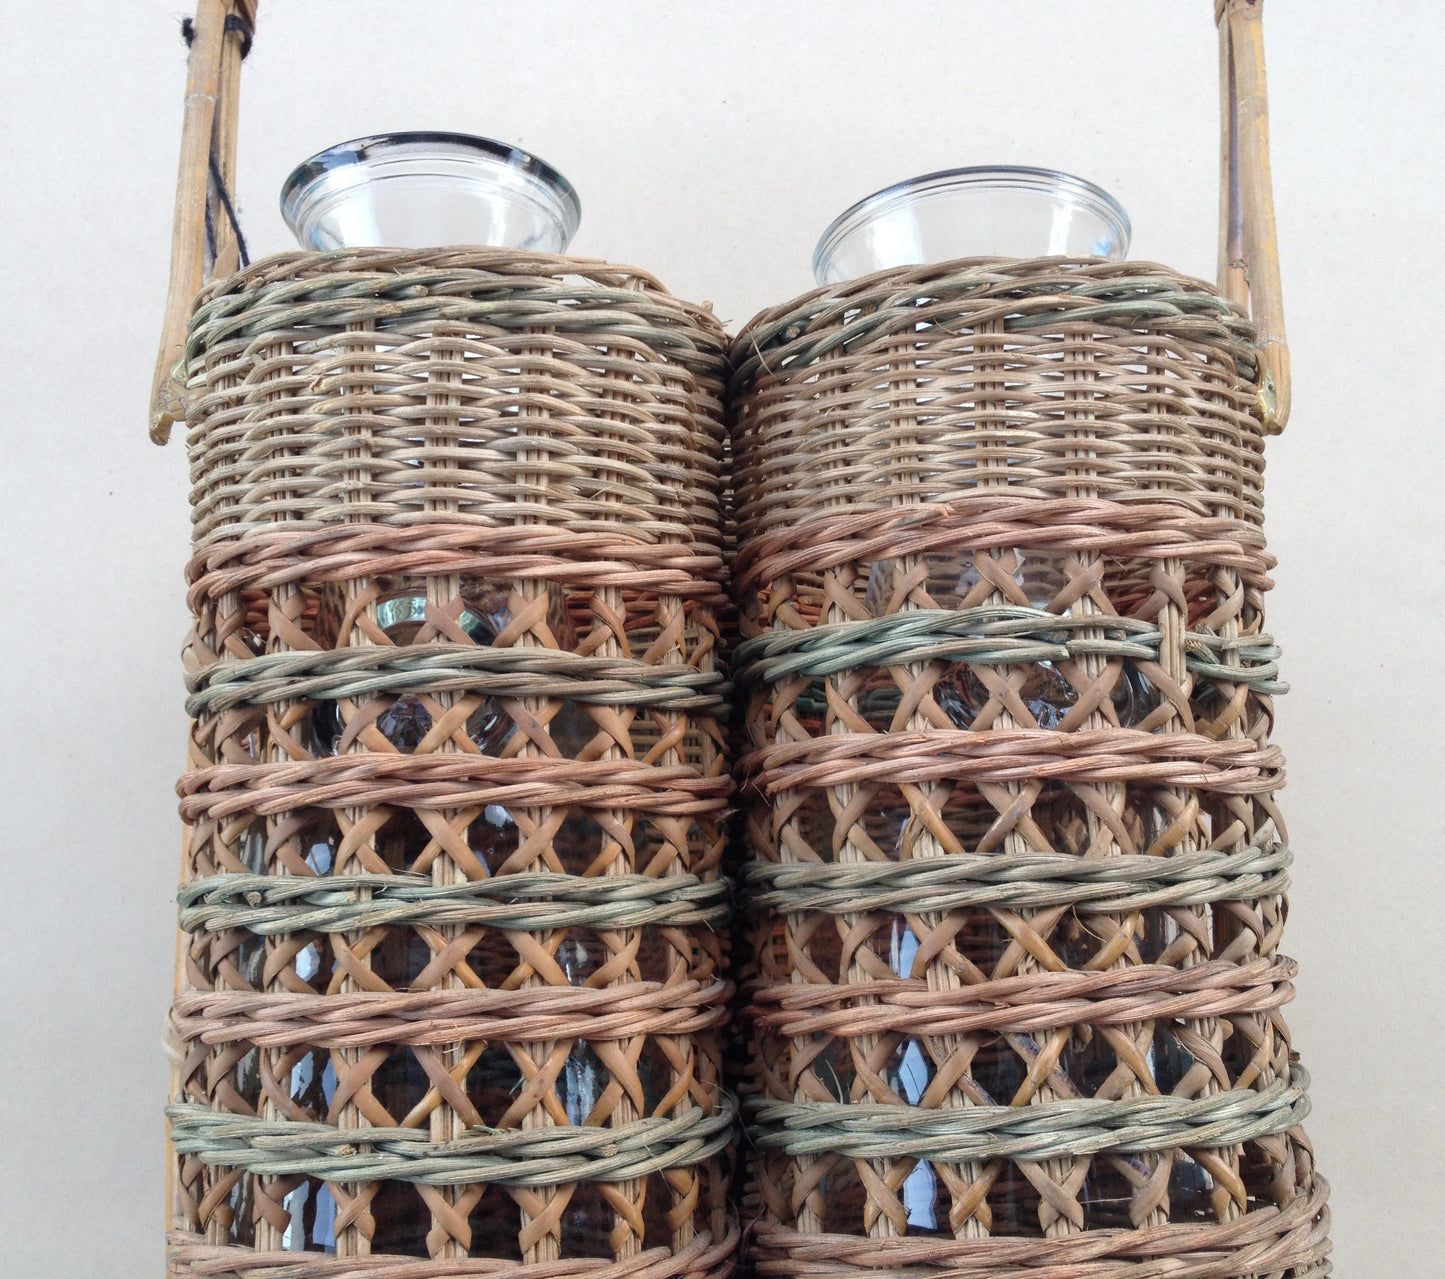 Rattan Picnic Basket with Glass Caraffes